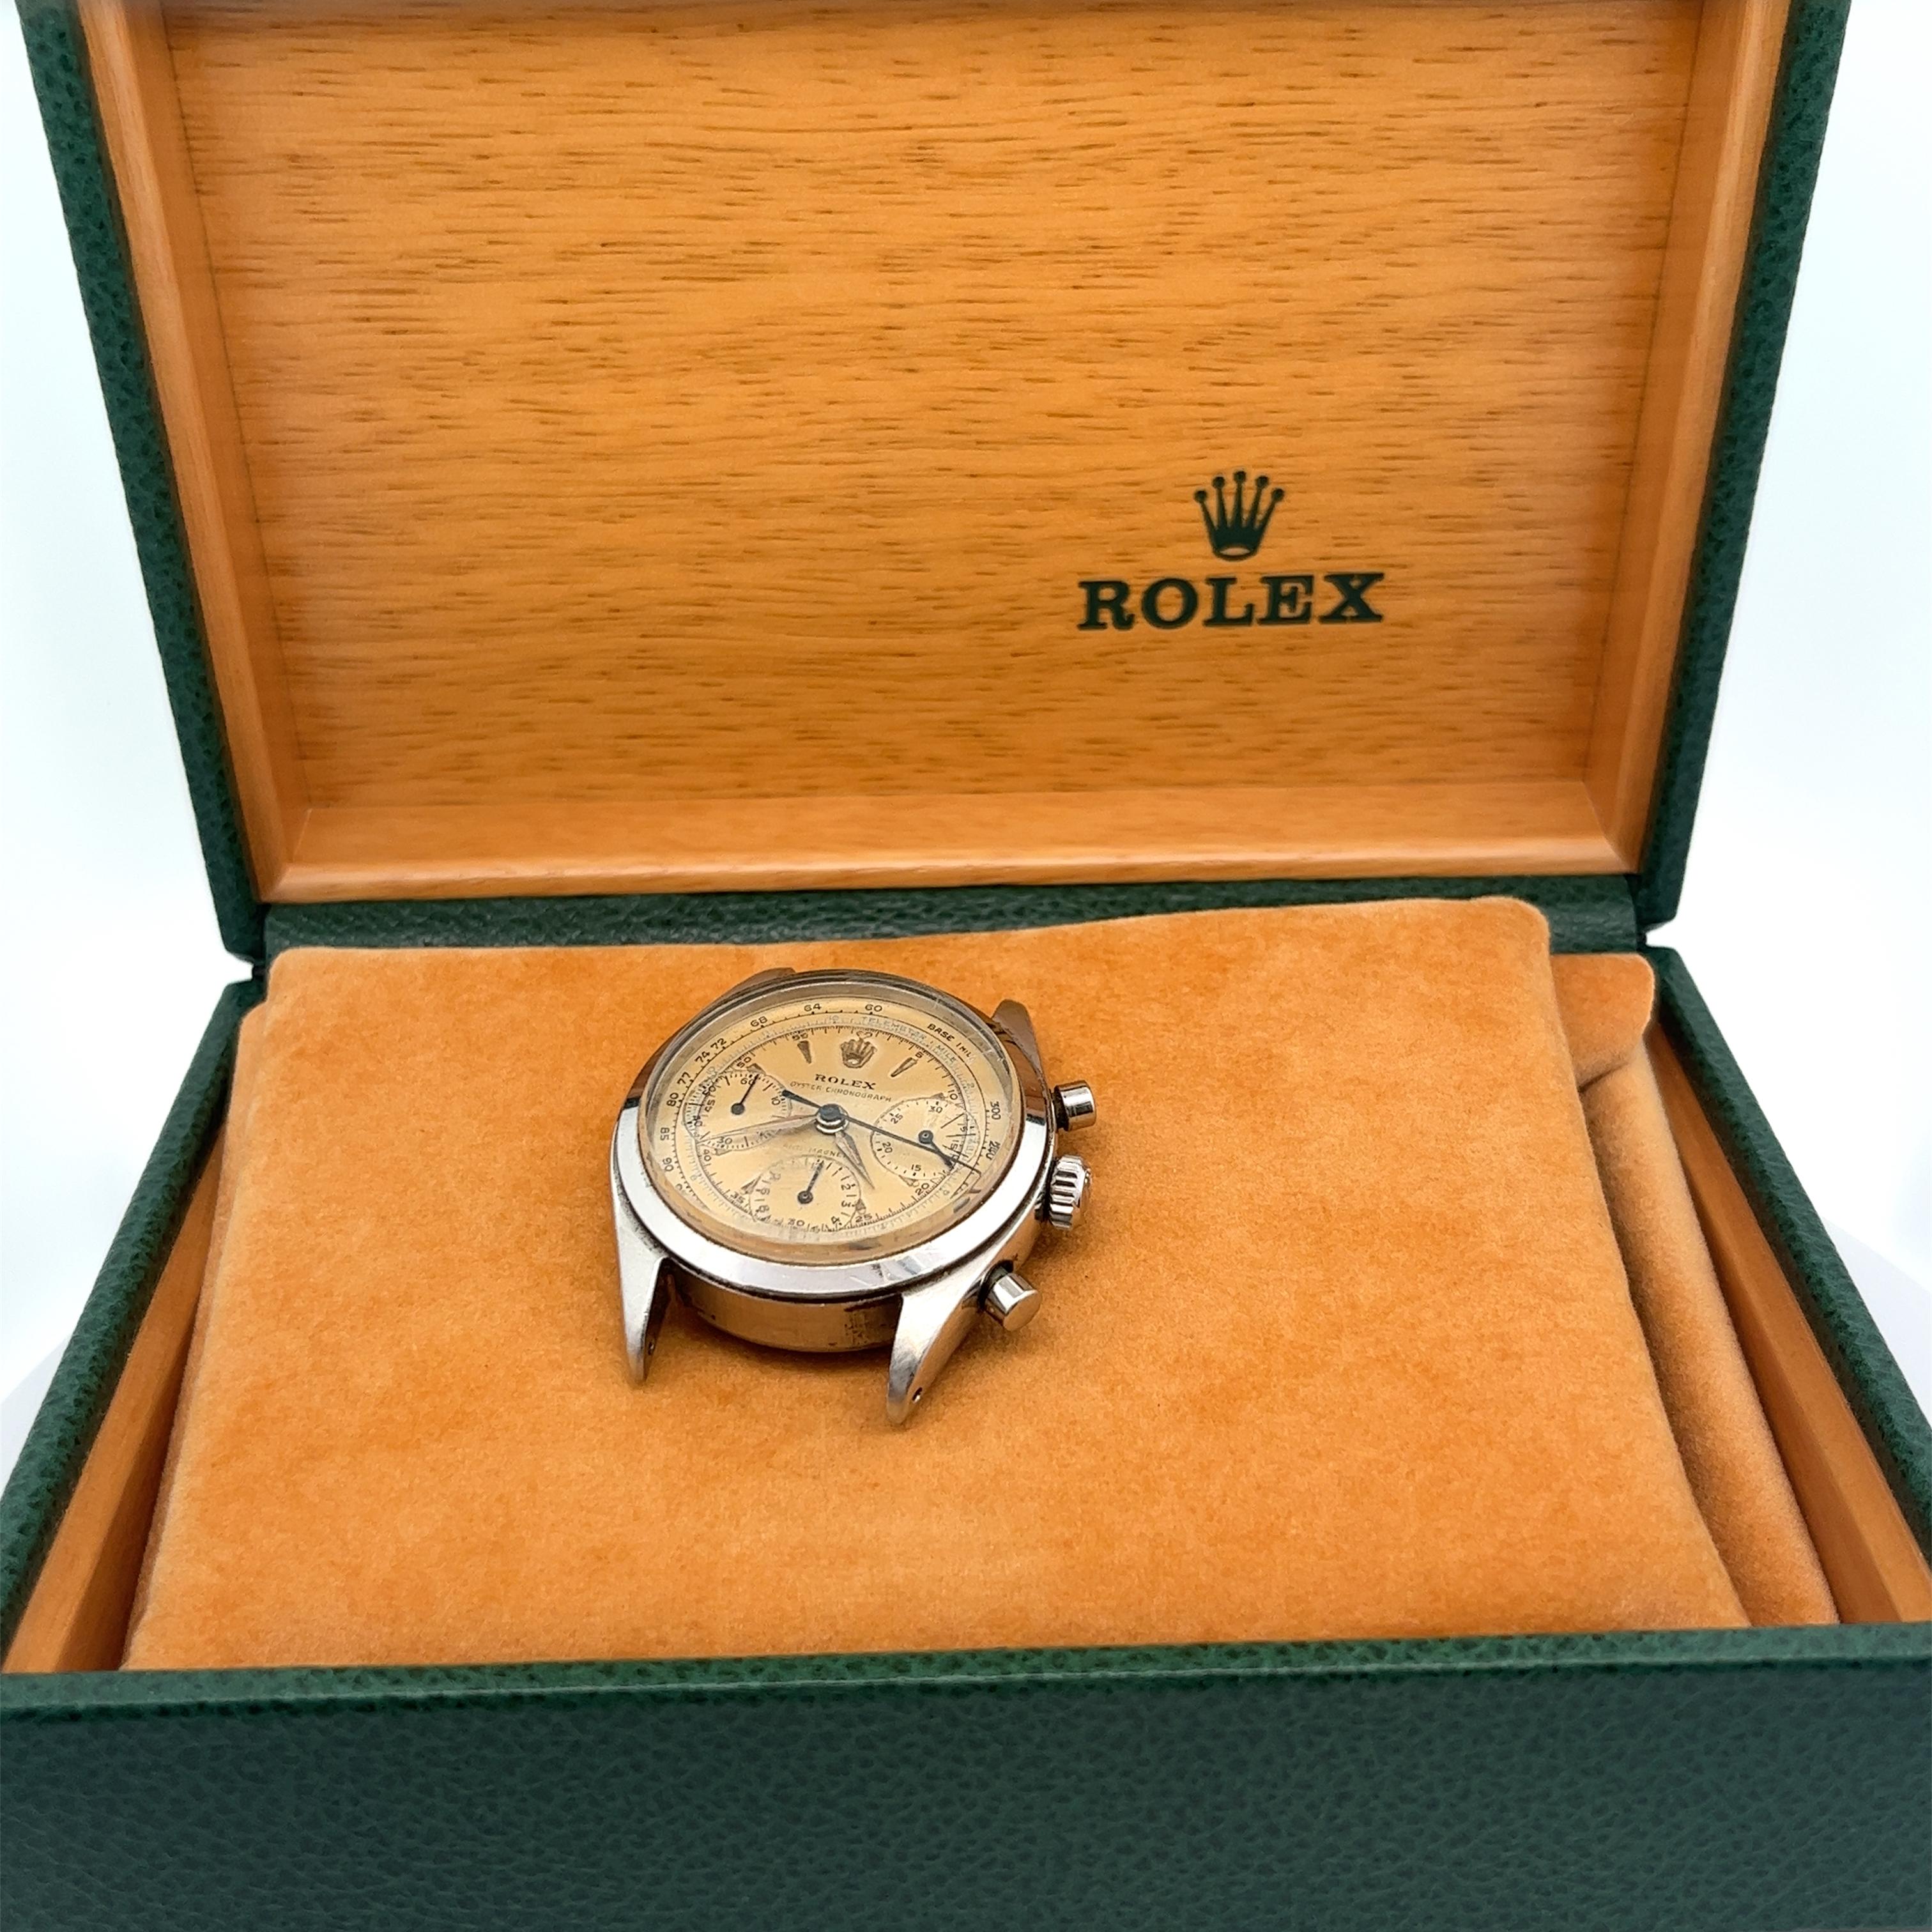 Vintage Rolex Pre Daytona Oyster Chronograph 6234 Watch 36mm Manual Wind In Good Condition For Sale In Miami, FL